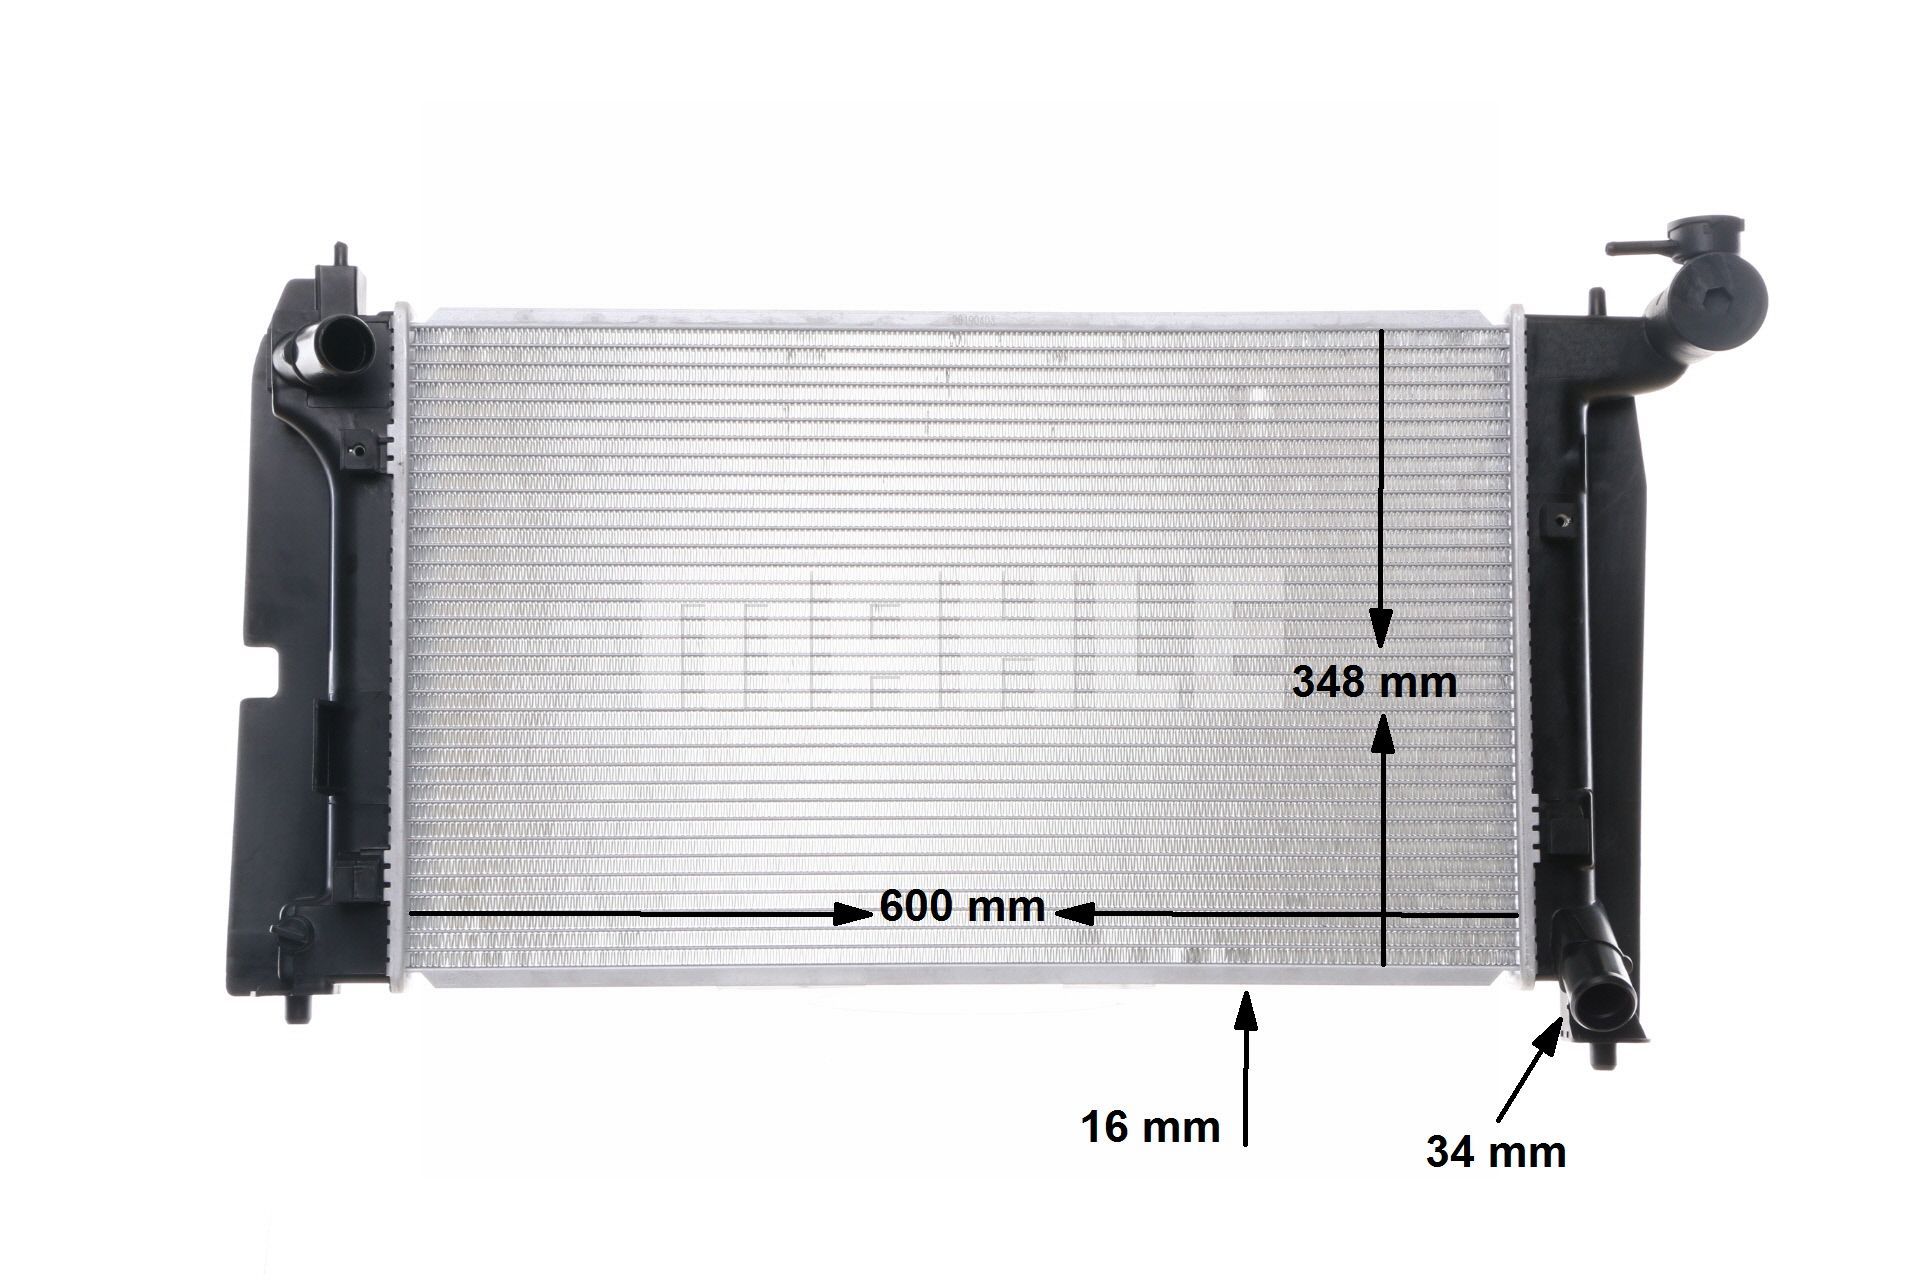 MAHLE ORIGINAL CR 1526 000S Engine radiator for vehicles with/without air conditioning, 597 x 355 x 16 mm, Manual Transmission, Brazed cooling fins